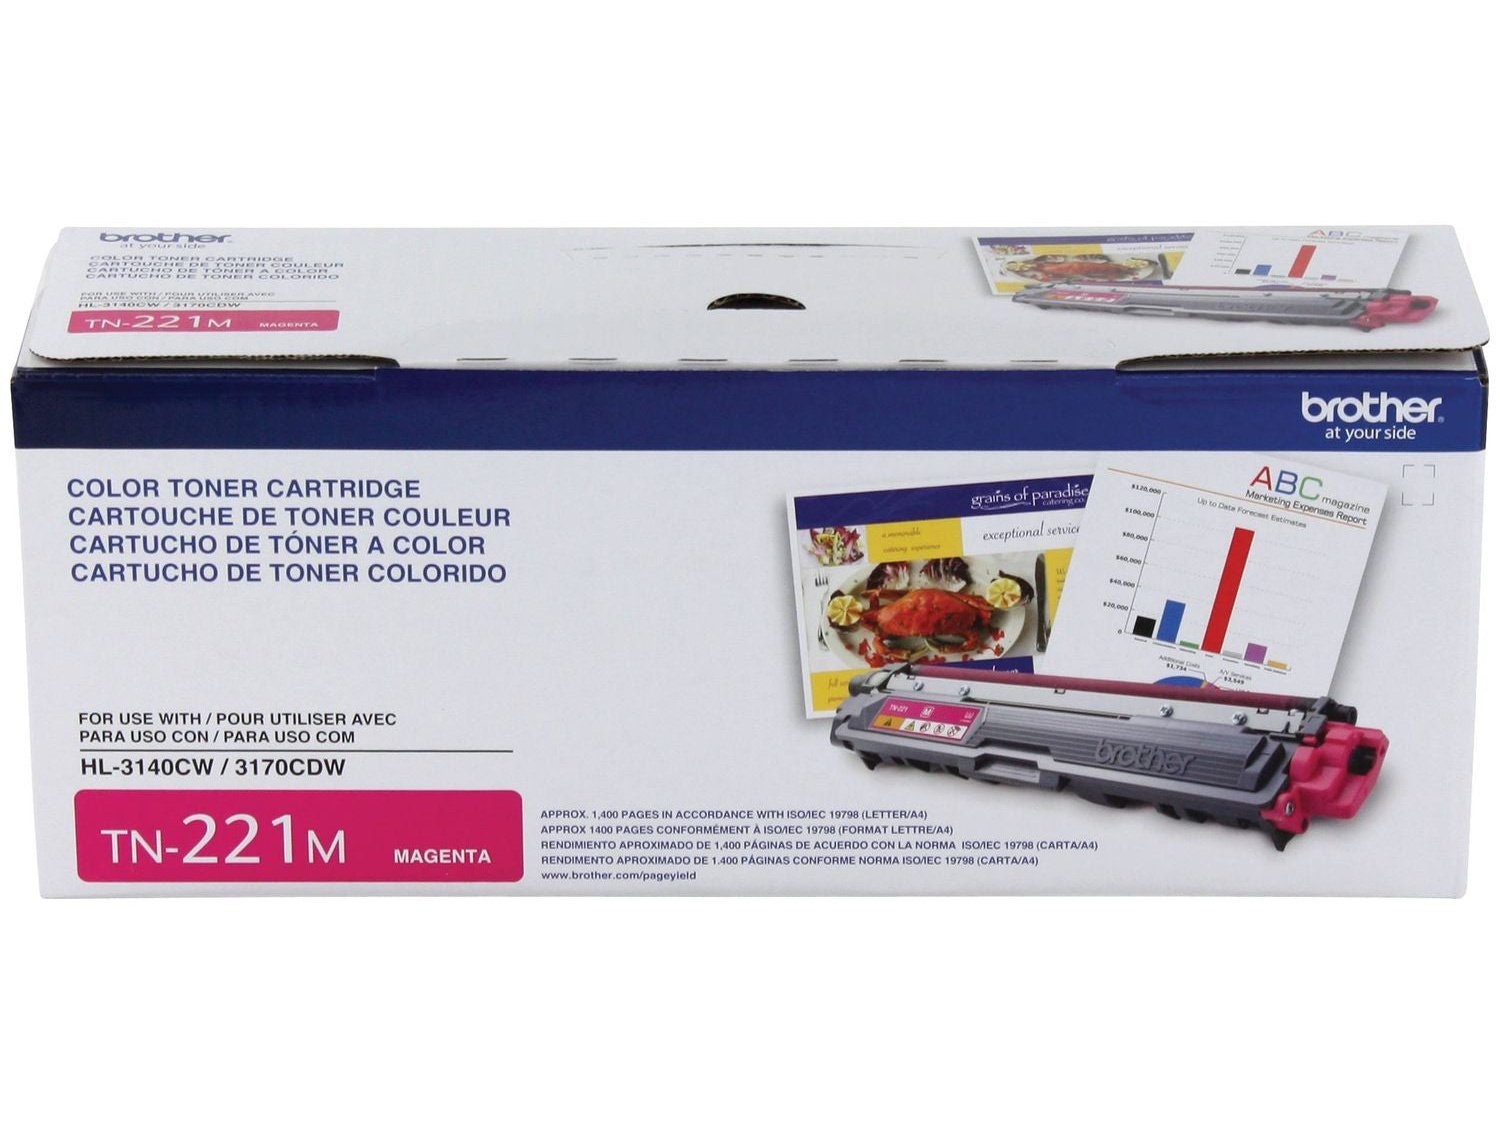 ICU Compatible/OEM Get Brother ICU-TN-221-M Yields 2200 Pages TN-221 Magenta Standard Yield 2200 Pages Toner Cartridge (TN221M) - Ink Cartridges USA